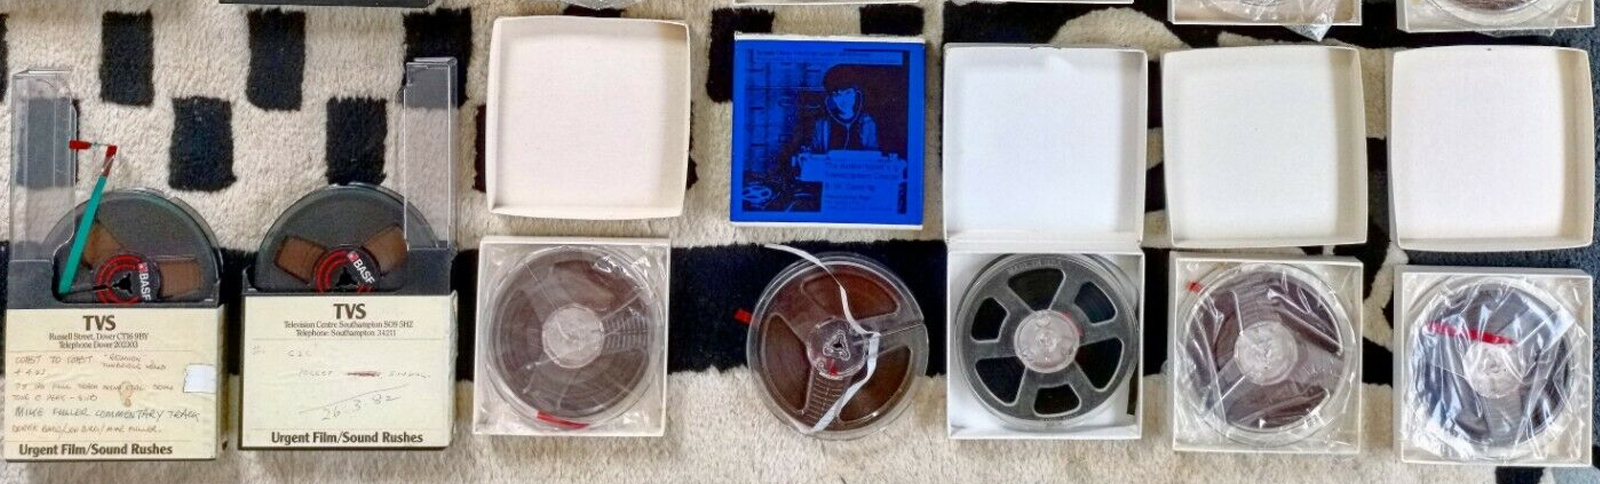 Domestic Family 1/4 Audio Reel to Reel Tape Transfers